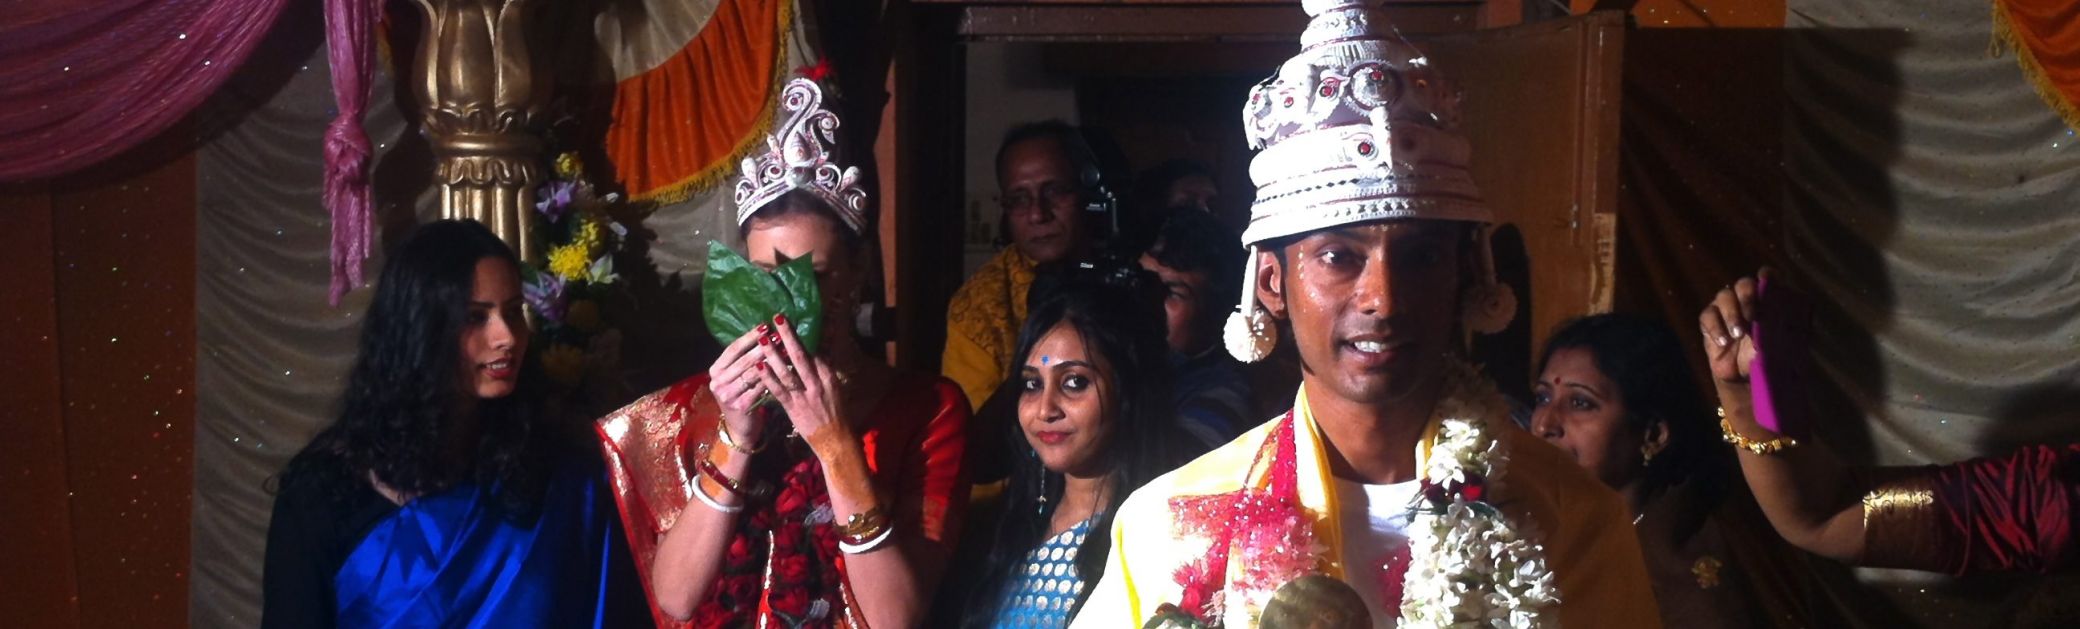 Movie stars and photobombs at an Indian wedding